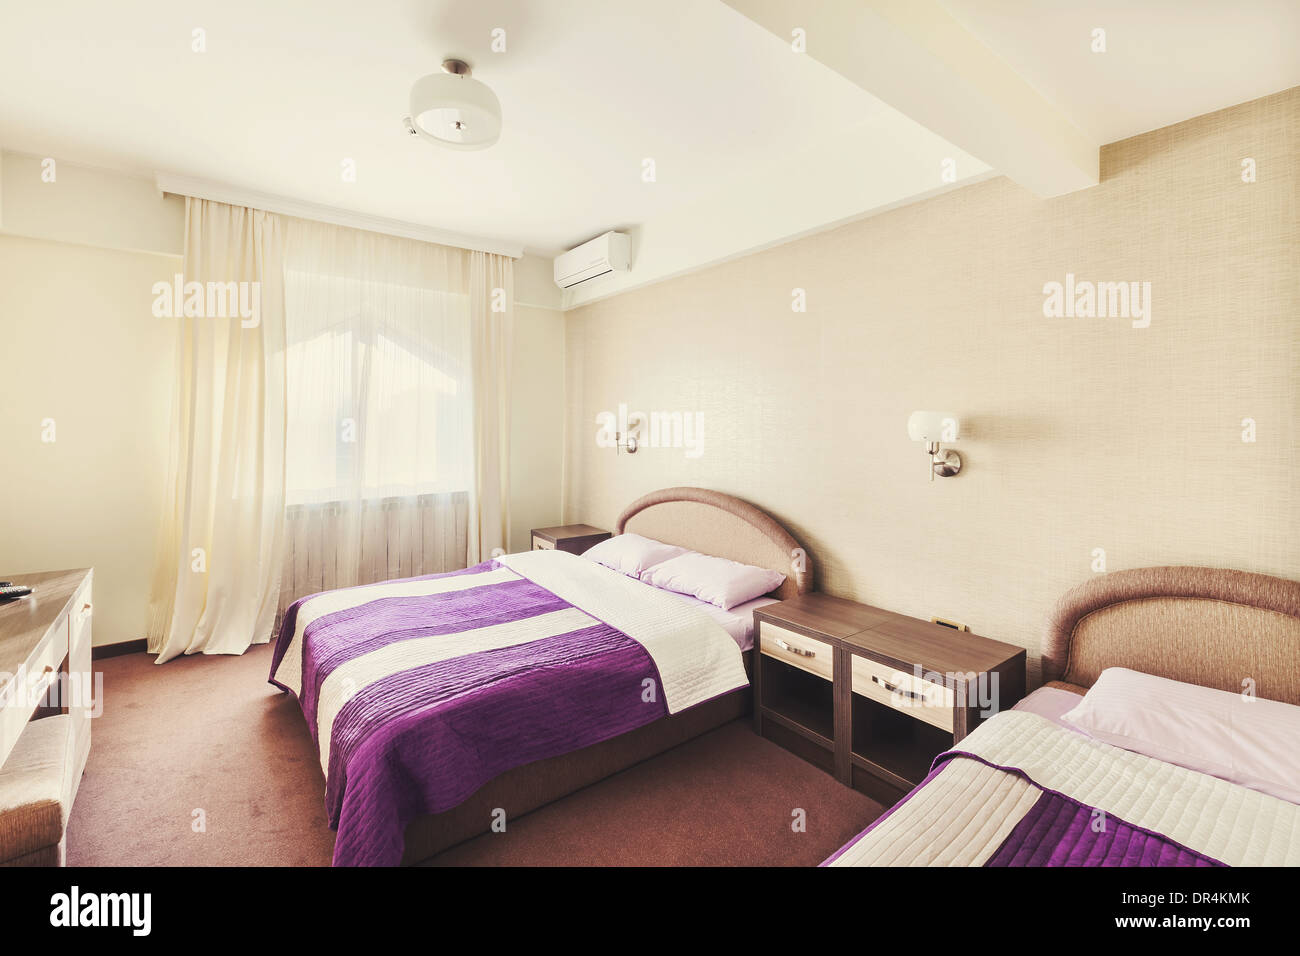 Interior of a hotel room, modern and clean. Stock Photo